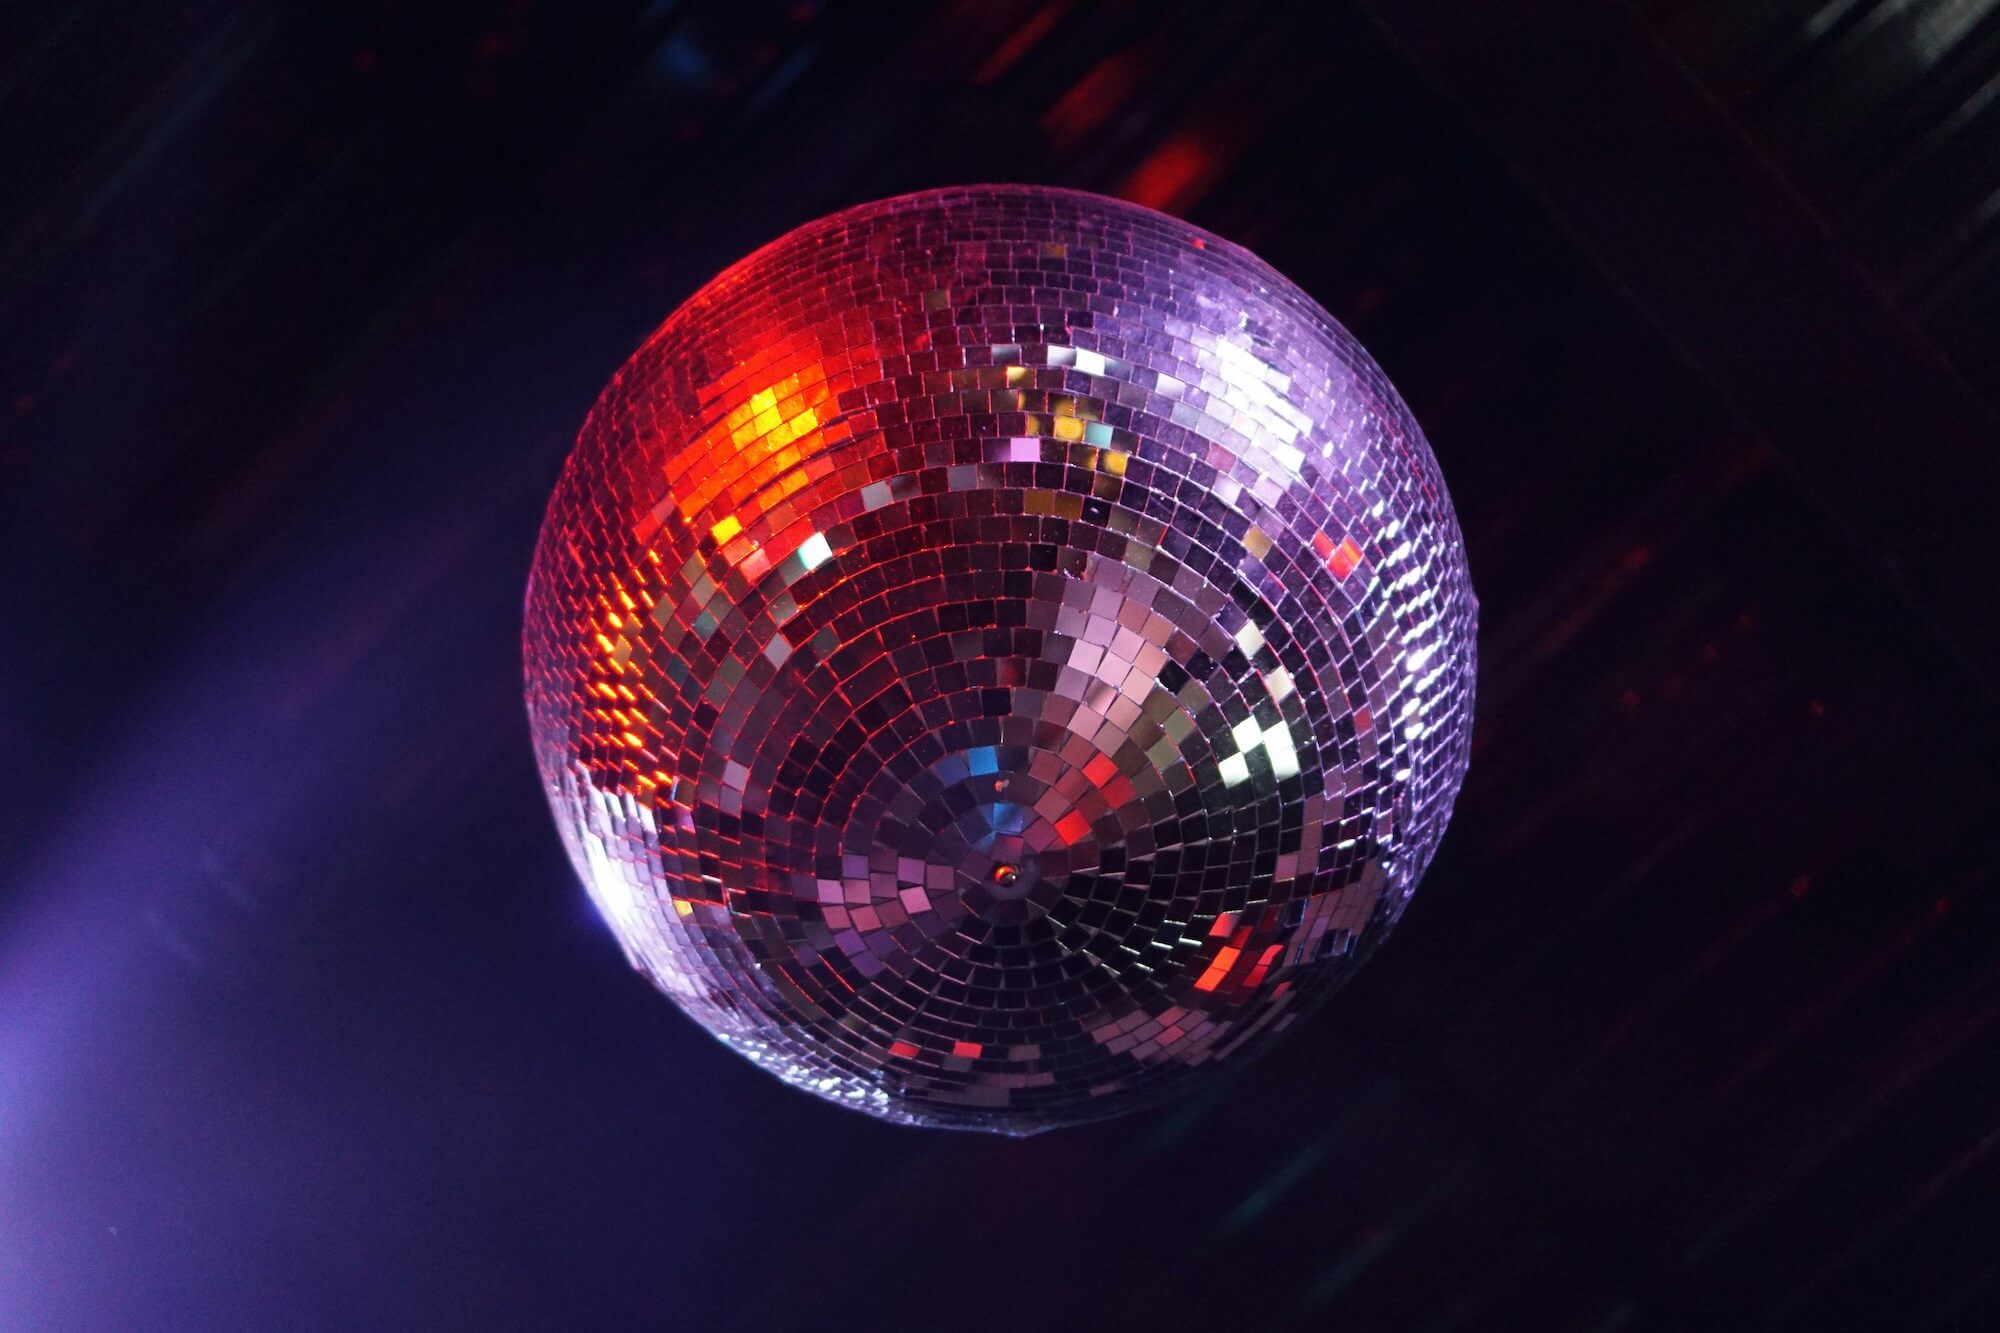 Image of disco ball to entice the community to come hang out with us during our grand opening event.